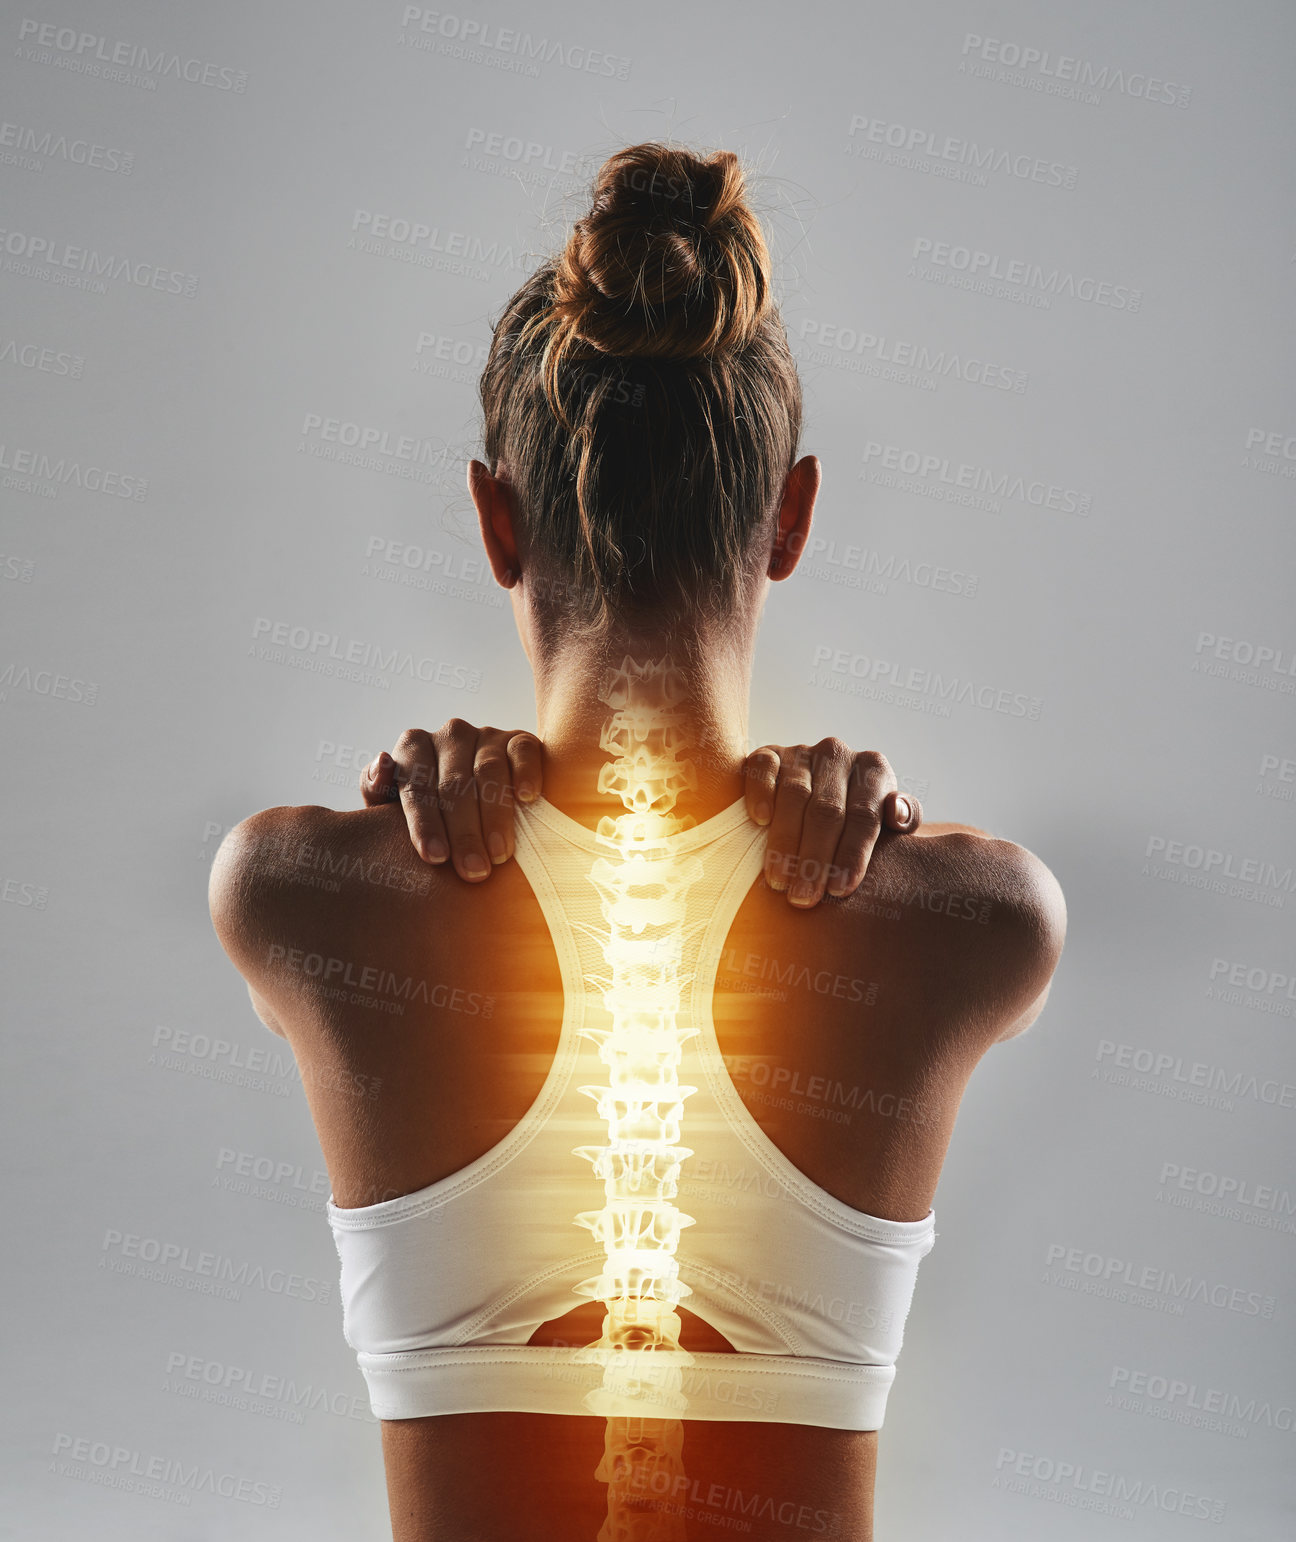 Buy stock photo Studio shot of an athlete with an injury highlighted in glowing red